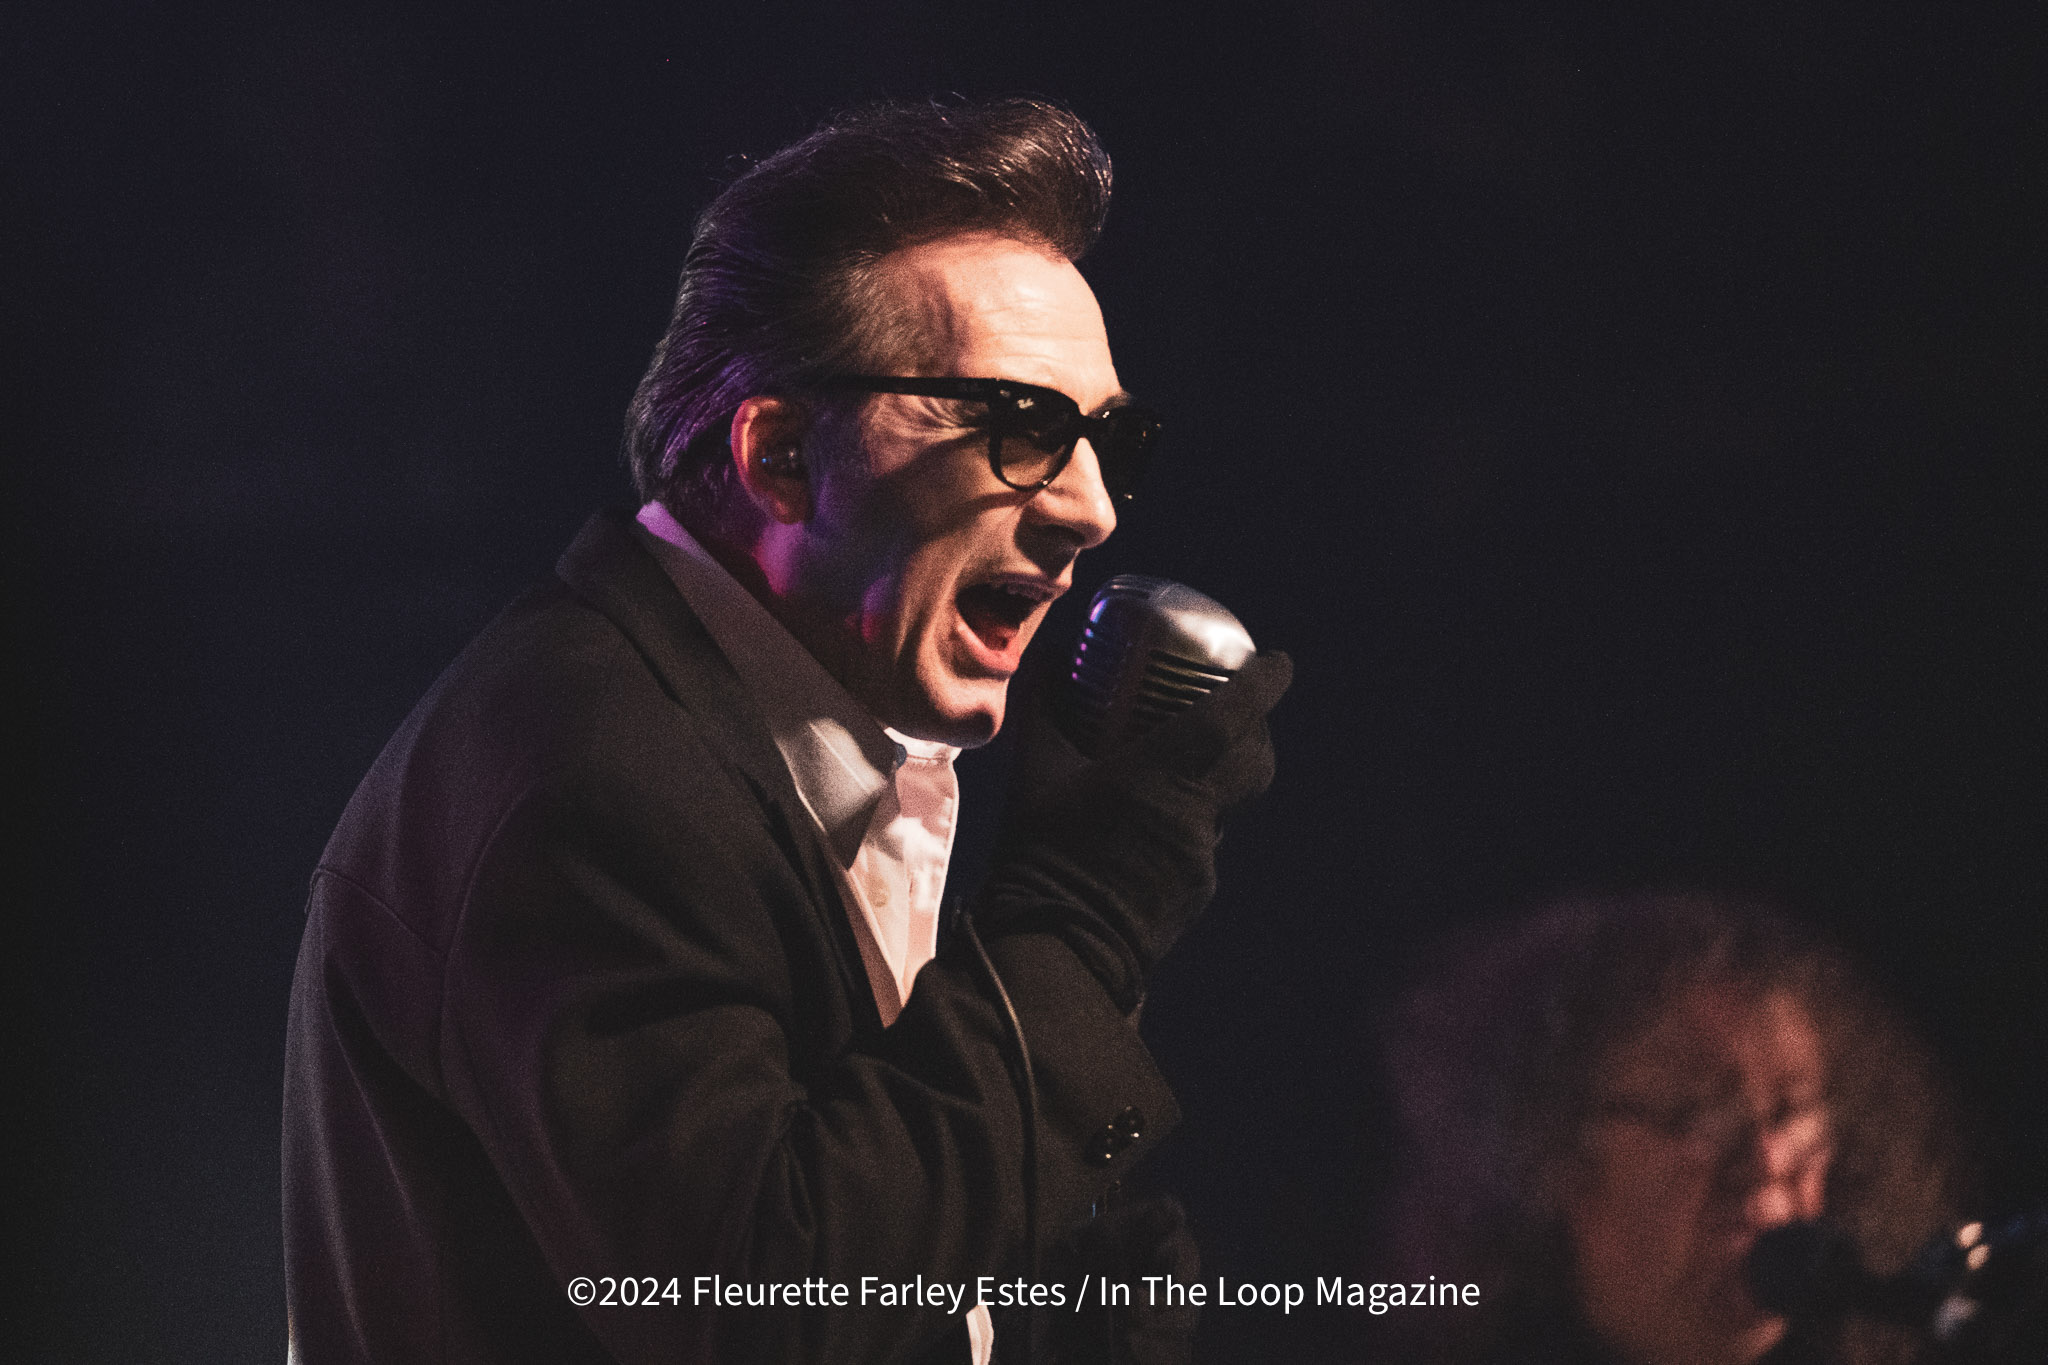 Photo Gallery: The Damned @ Congress Music Hall Chicago